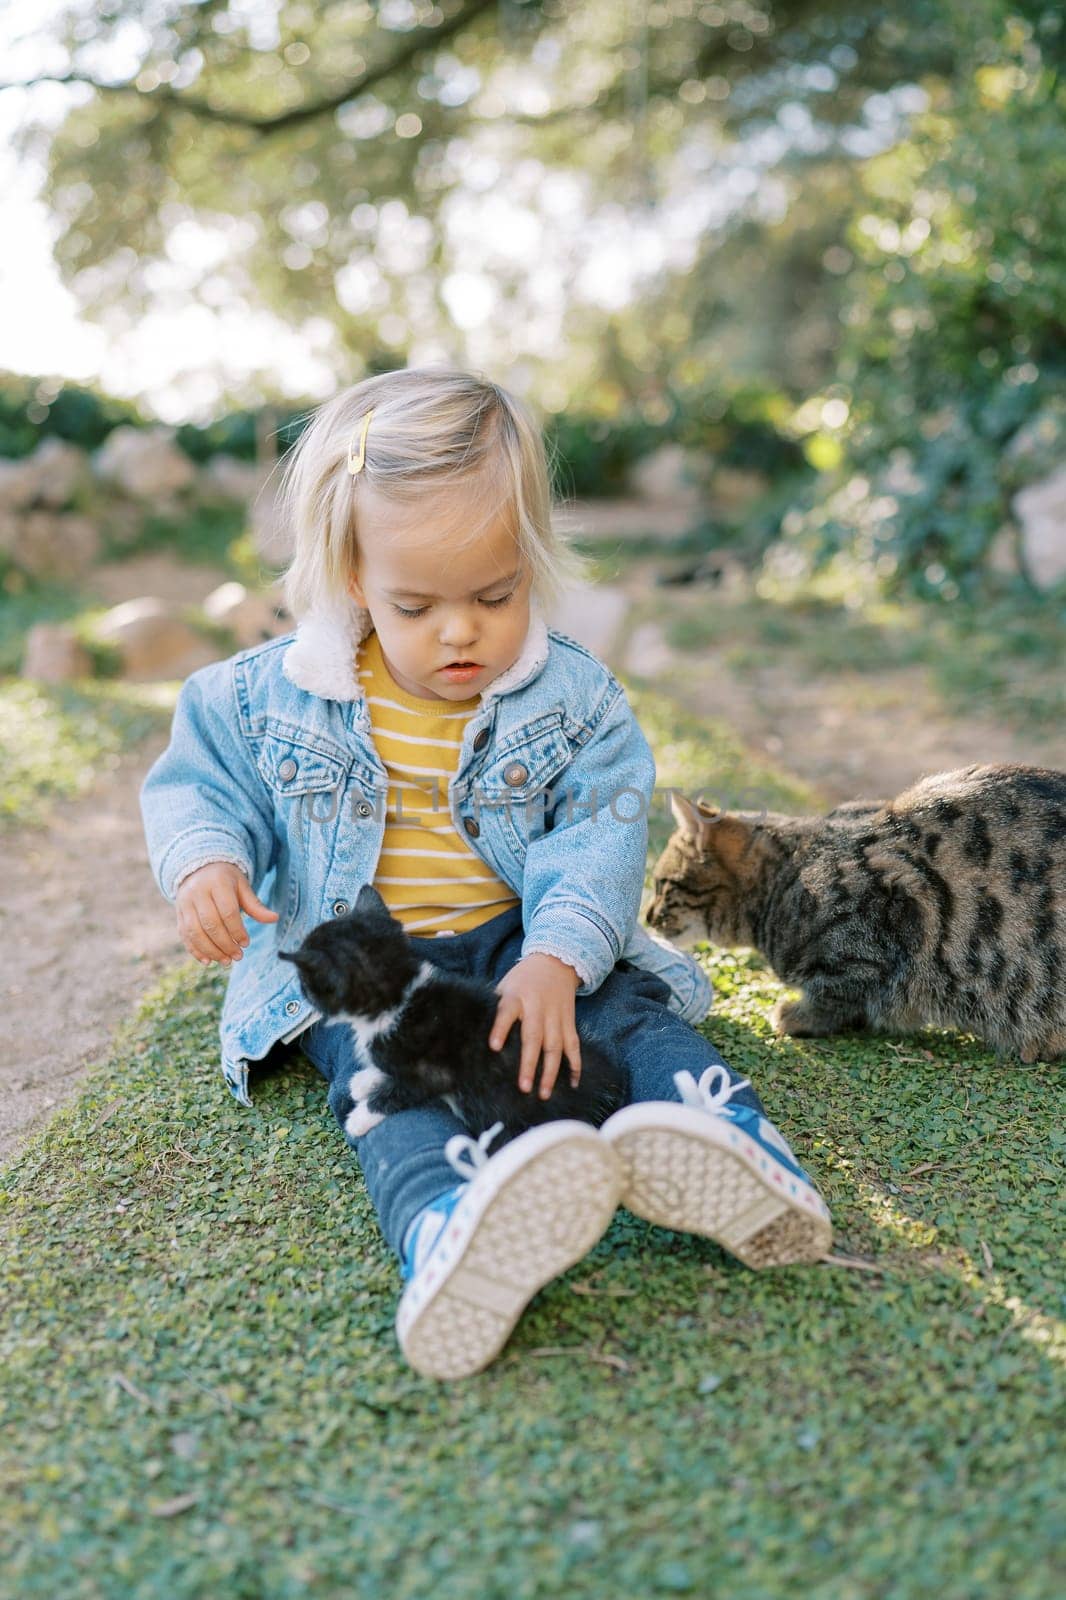 Little girl sits on the grass and pets a kitten on her knees next to a cat sniffing her by Nadtochiy